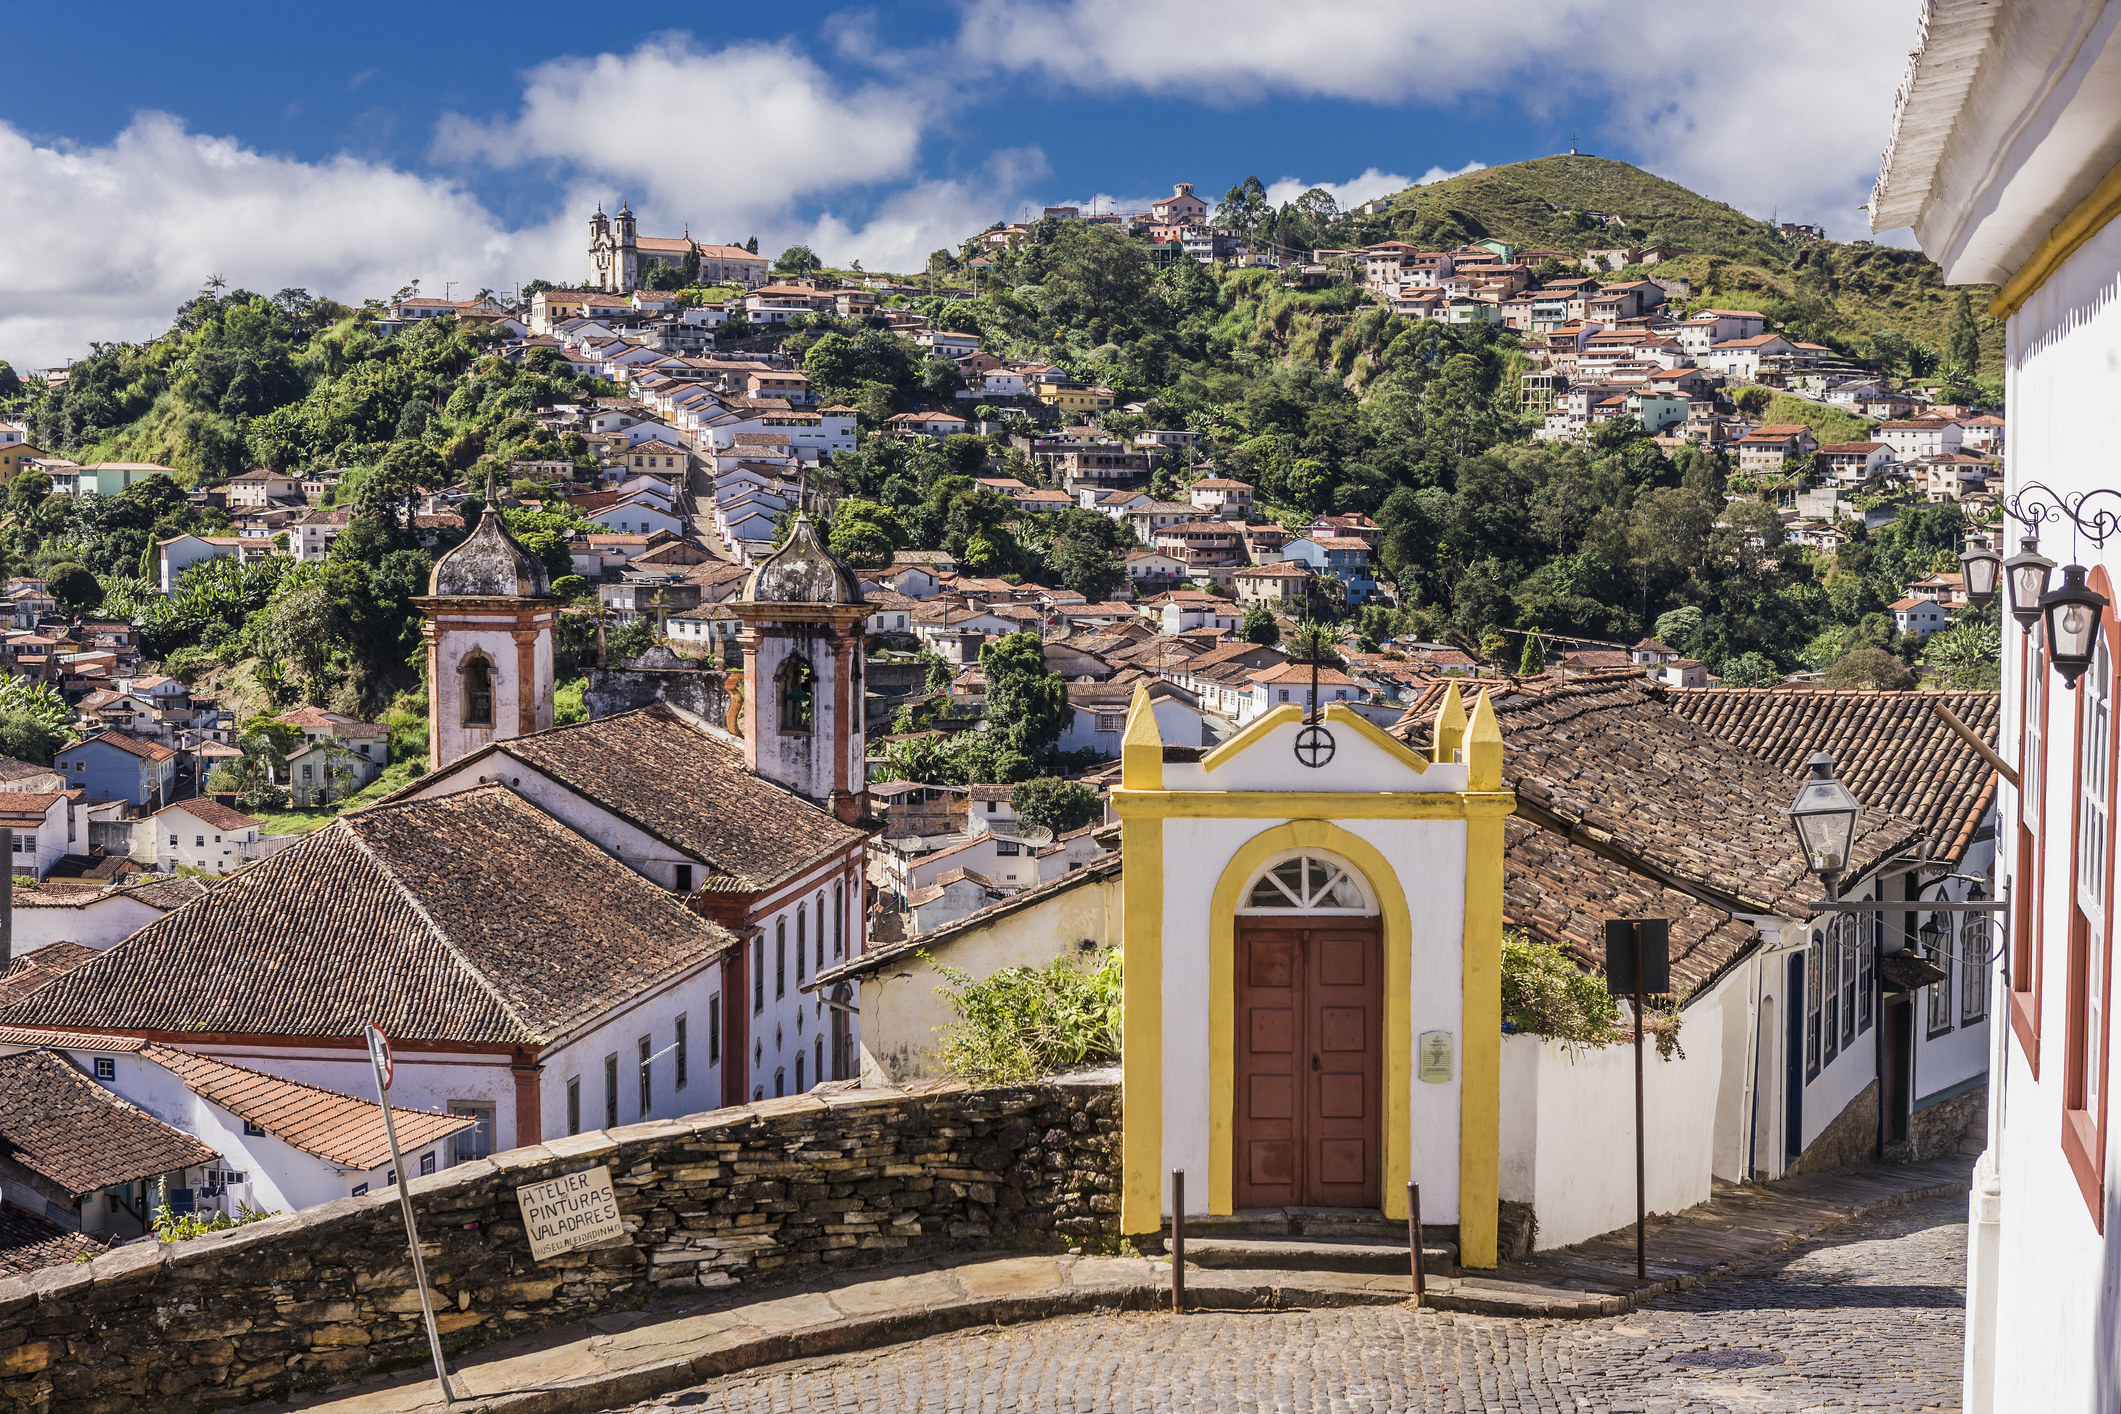 A beautiful colonial town in Brazil.